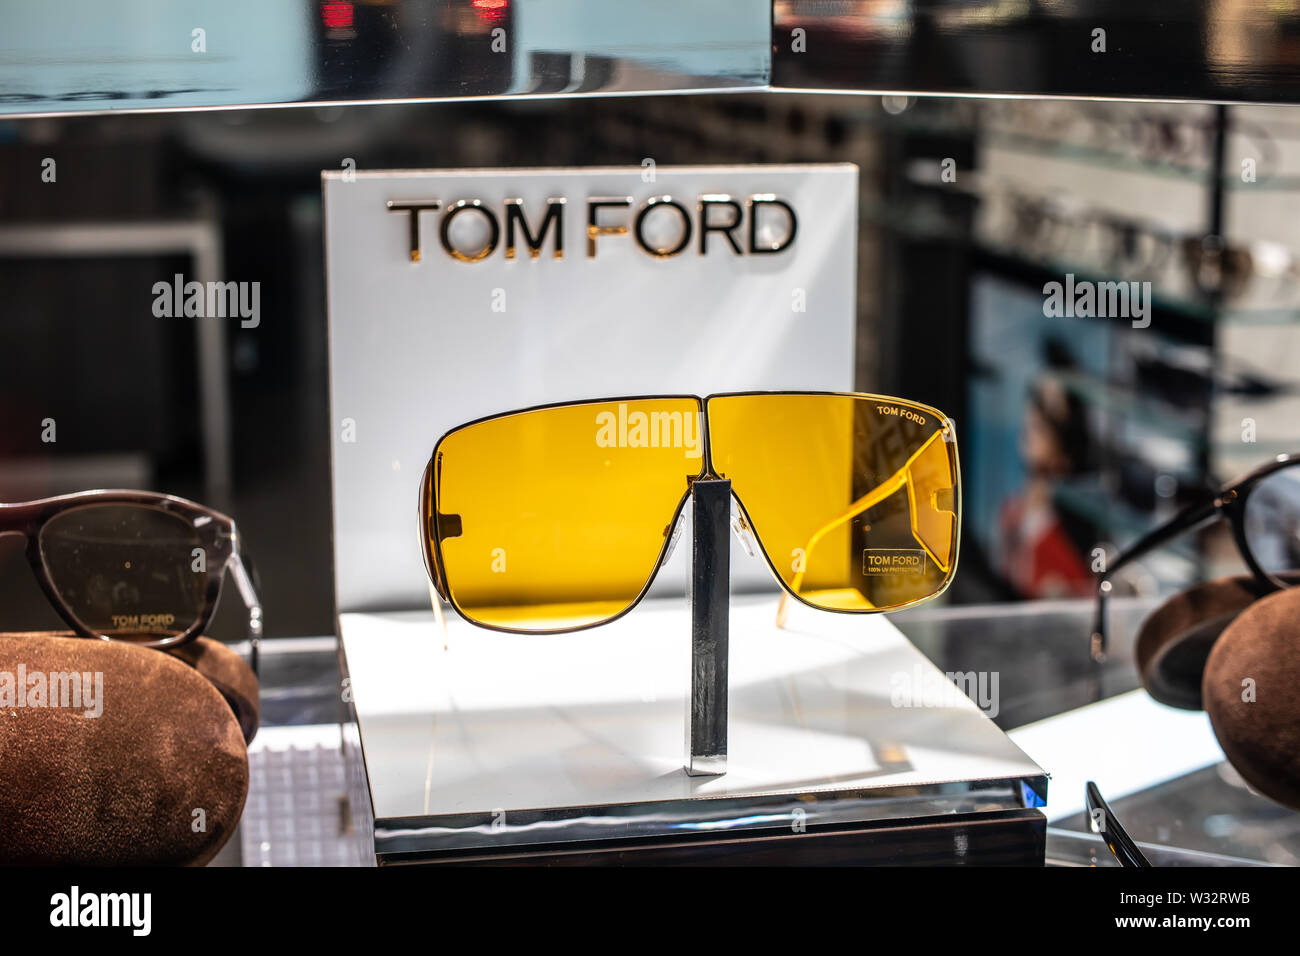 Geneva, March 2019 Tom Ford sunglasses on display for sale, Eyewear Collections, Elegant, timeless Tom Ford glasses created for men and women Stock Photo Alamy